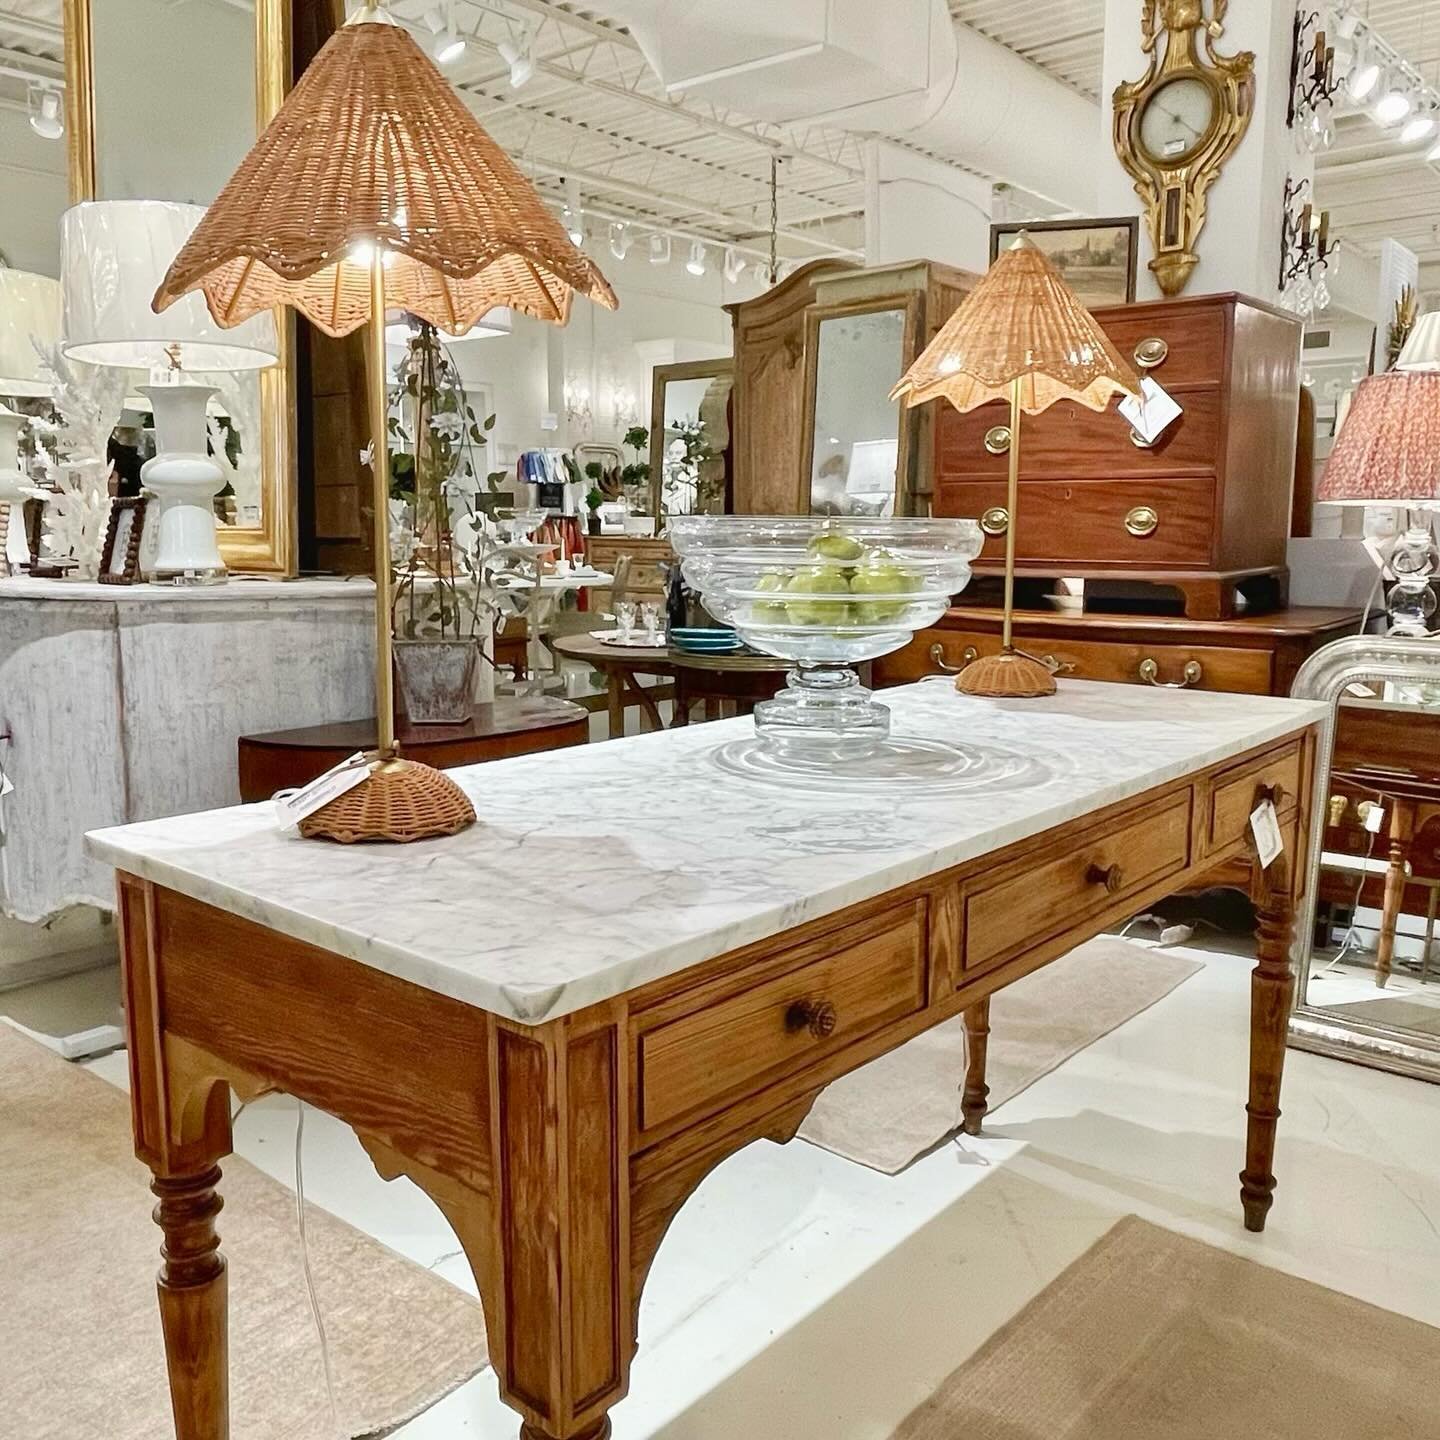 Current Crush: this beautiful antique French natural pine and white marble top piece. Would be the PERFECT kitchen island! 😍 Or console! Or sofa table! #heritageclt #curateddecor #europeanantiques #italianantiques #englishantiques #frenchantiques #a